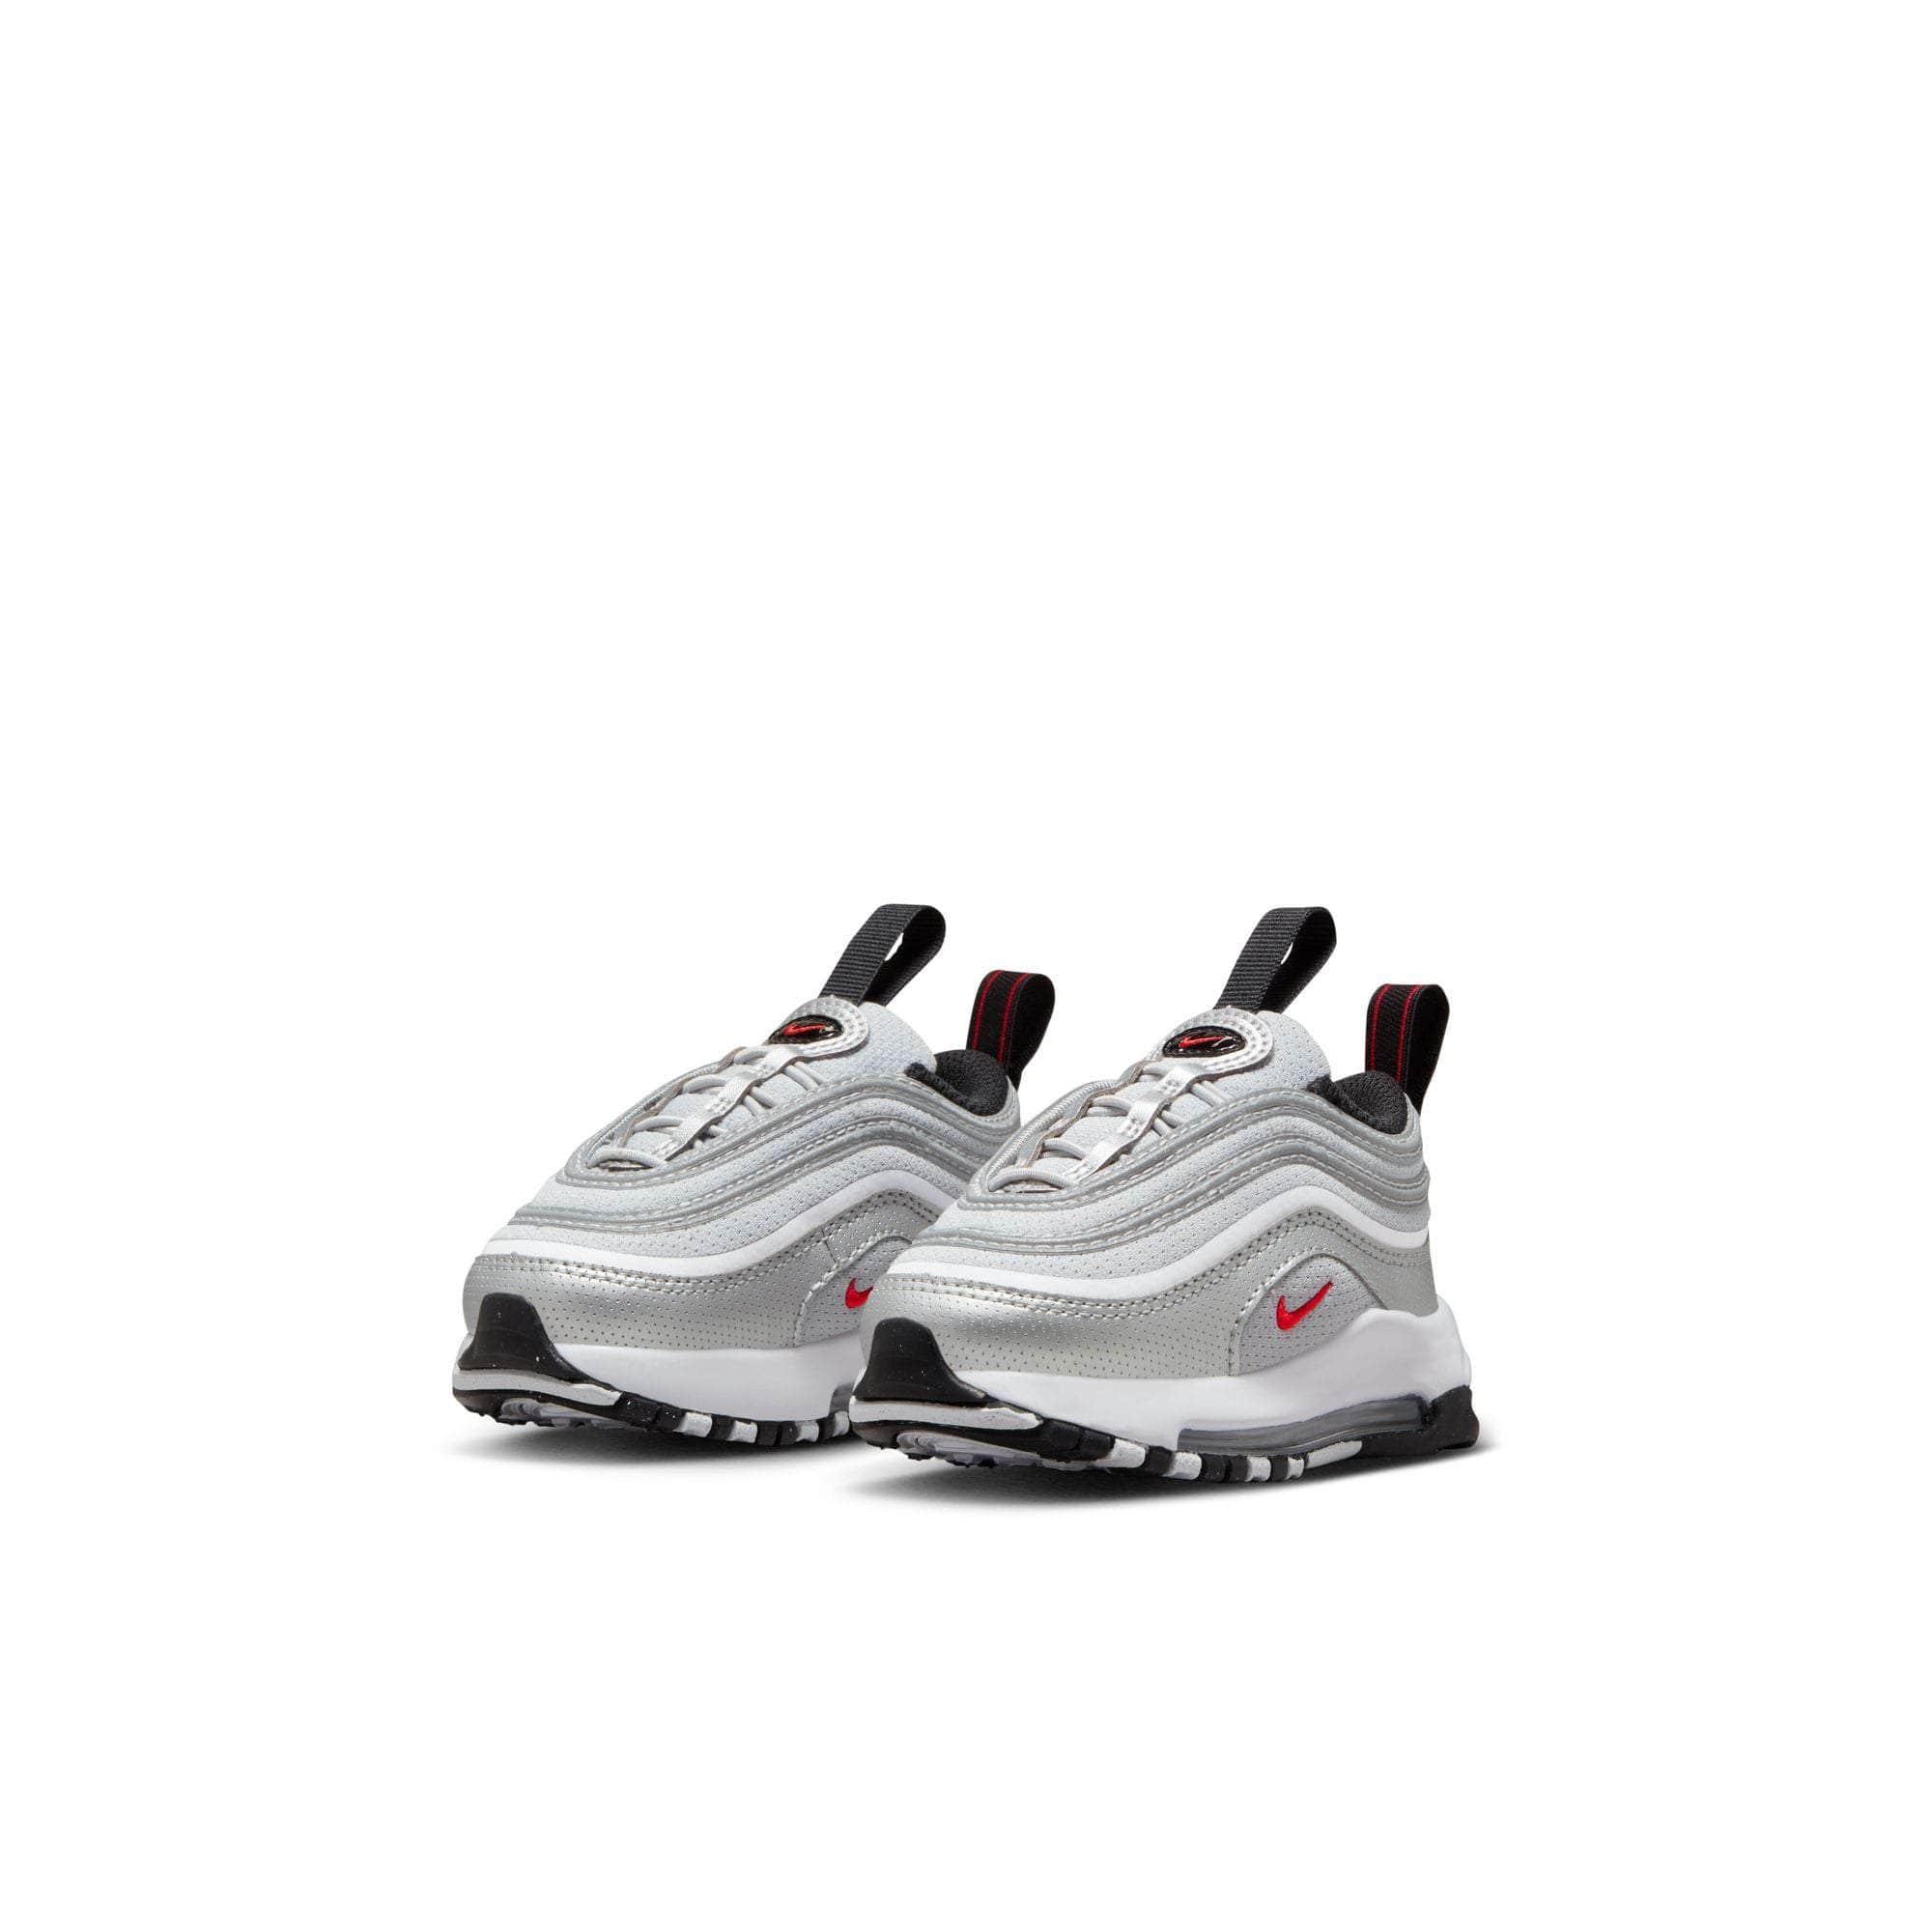 Official Images of the Nike jordan Air Max 97 White Bullet